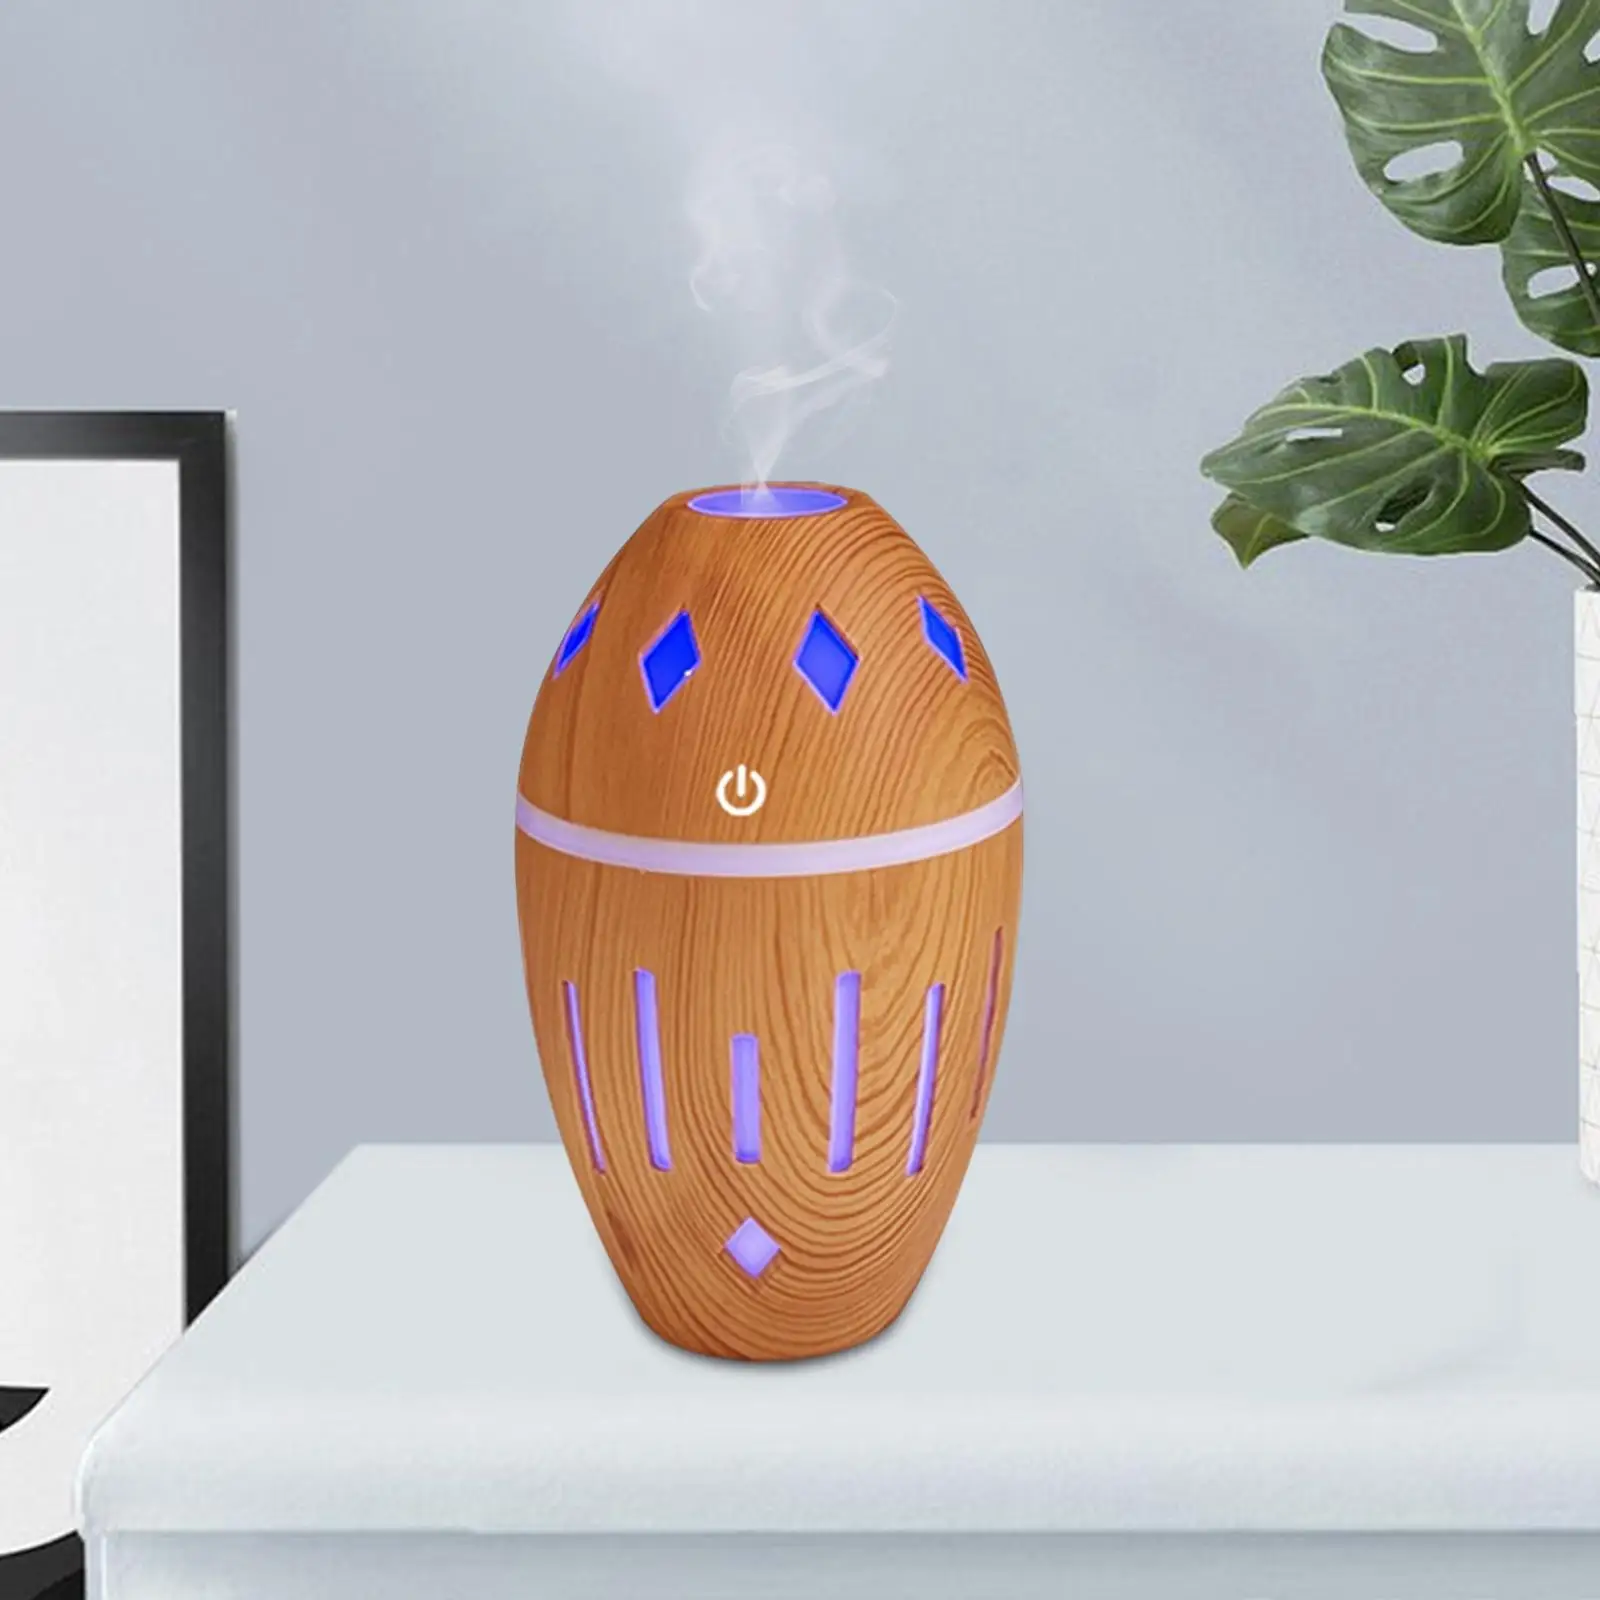 Cool Mist Humidifier with Lights 300ml Air Humidifier Air Diffuser for Nightstand Indoor Dorm Bedroom Living Room